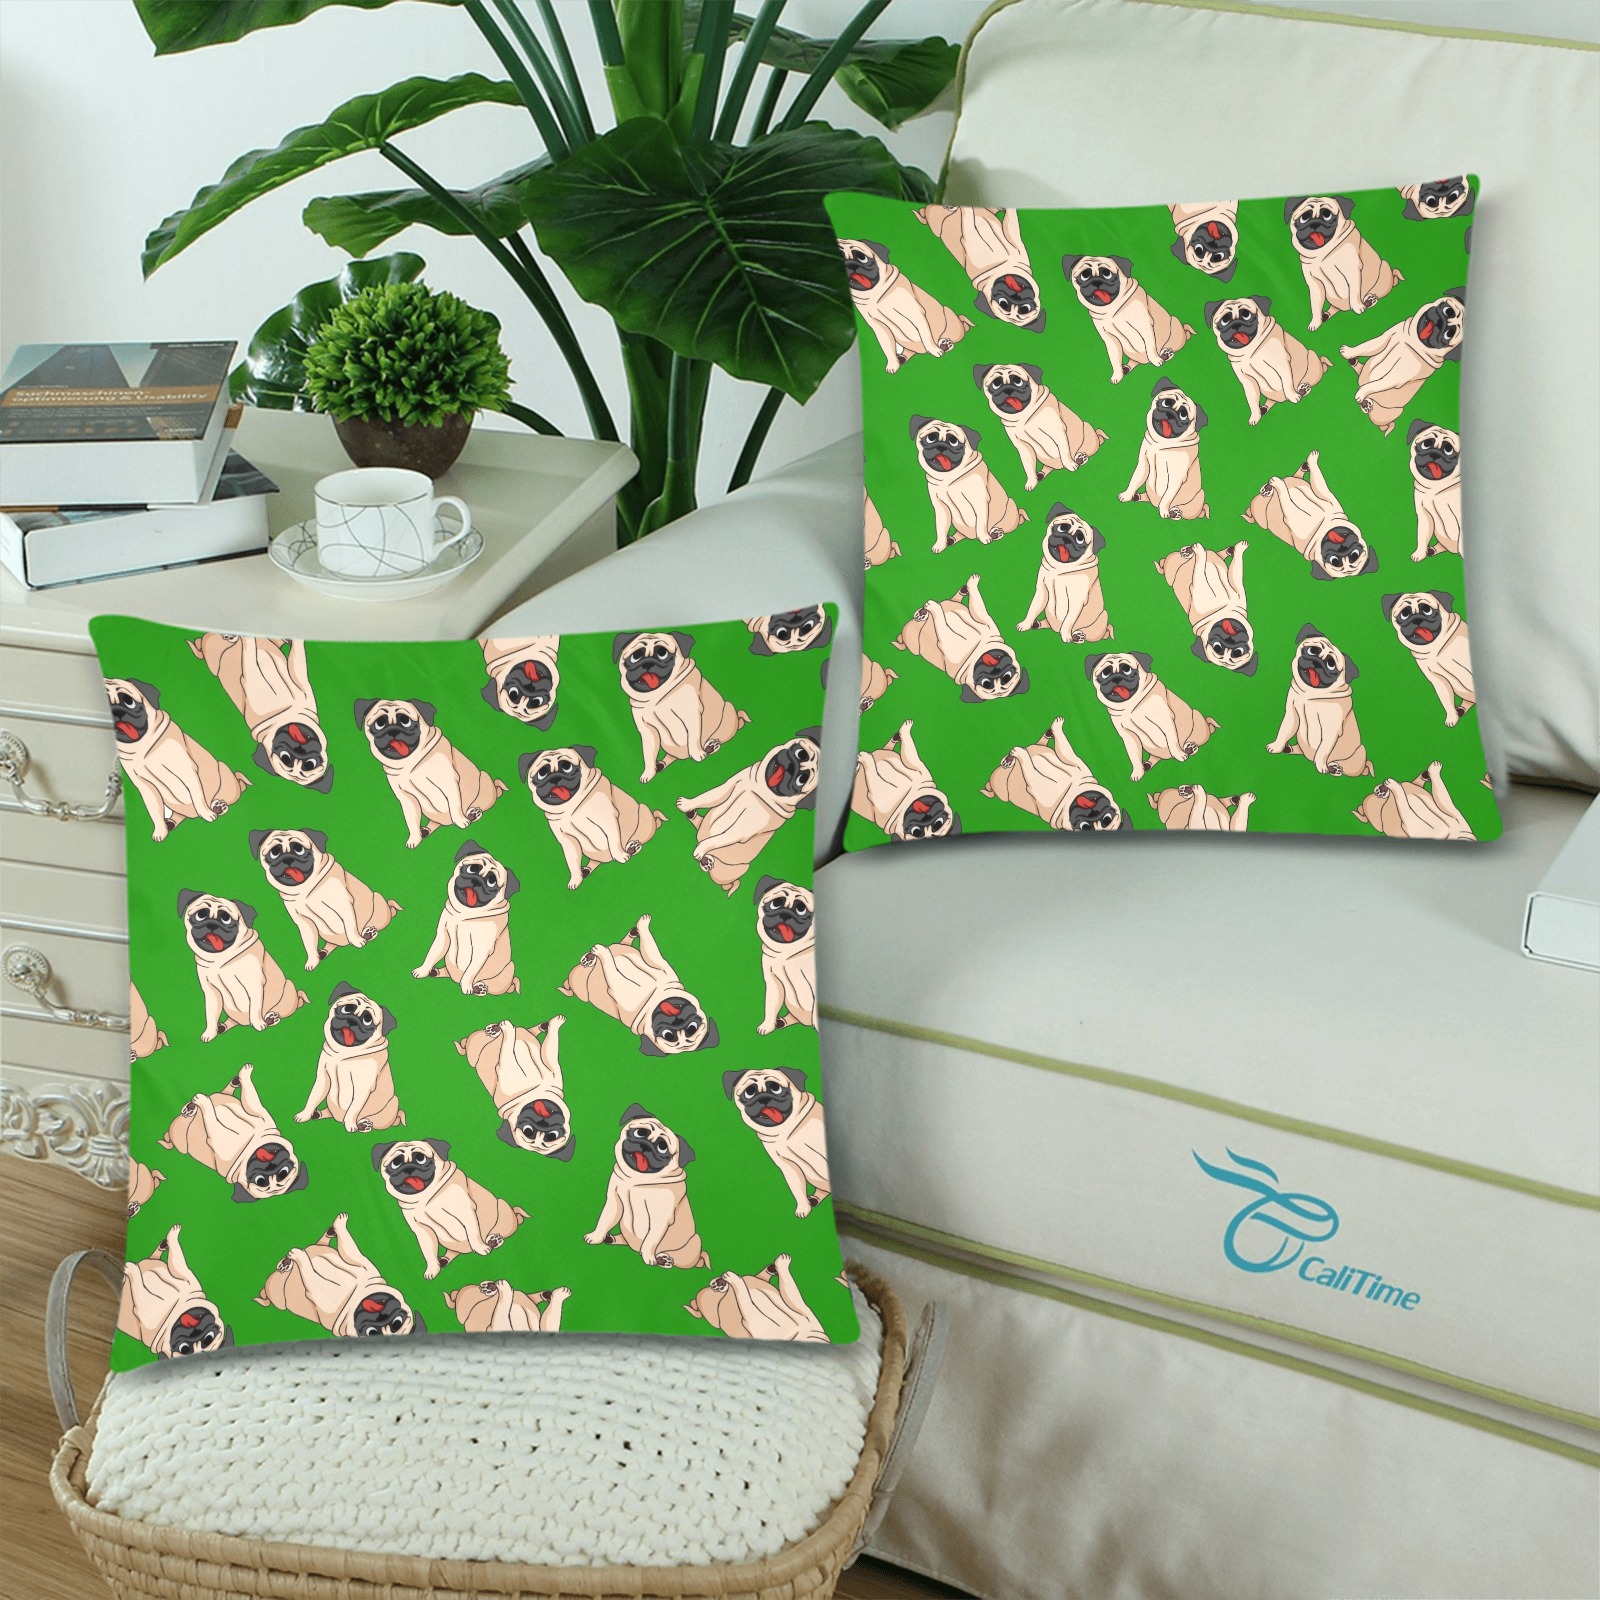 Pugs on Green Custom Zippered Pillow Cases 18"x 18" (Twin Sides) (Set of 2)